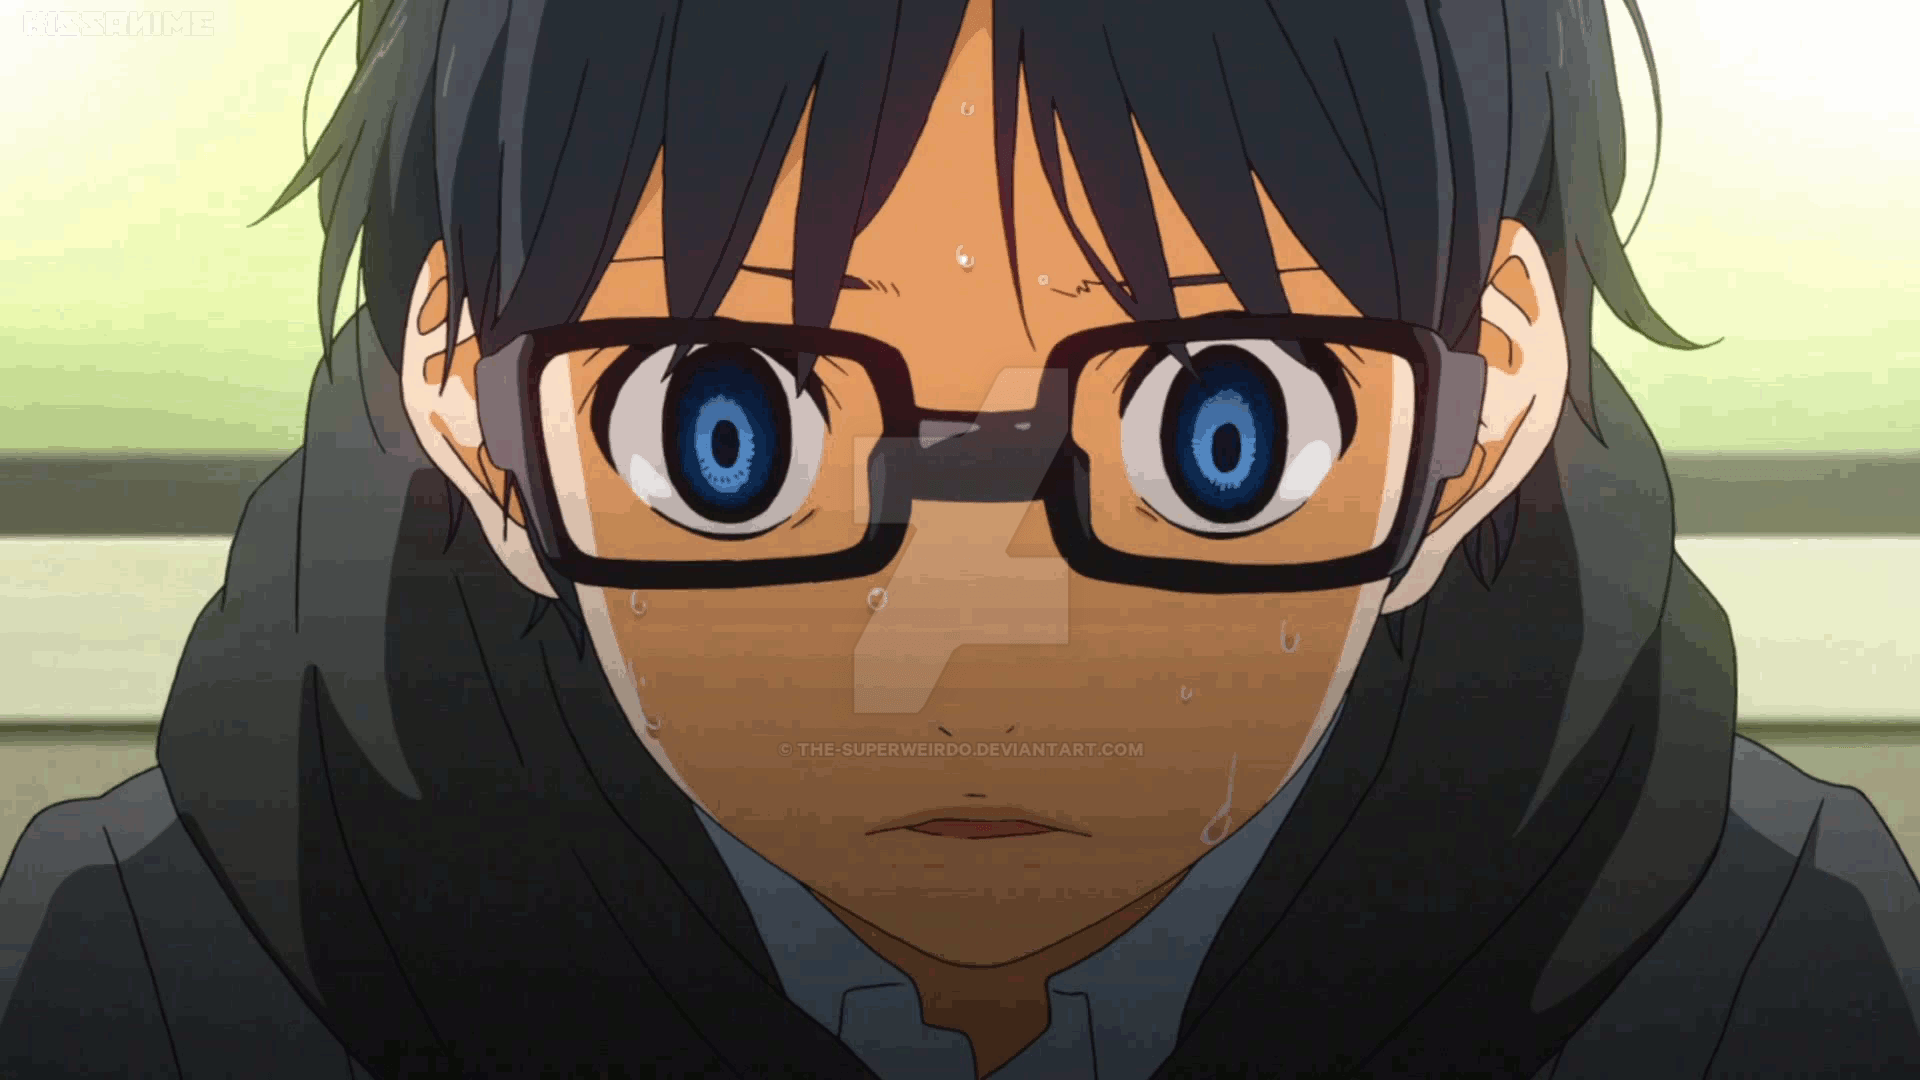 Your Lie in April (GIF Animation/Cinemagraph) by THE-SUPERWEIRDO